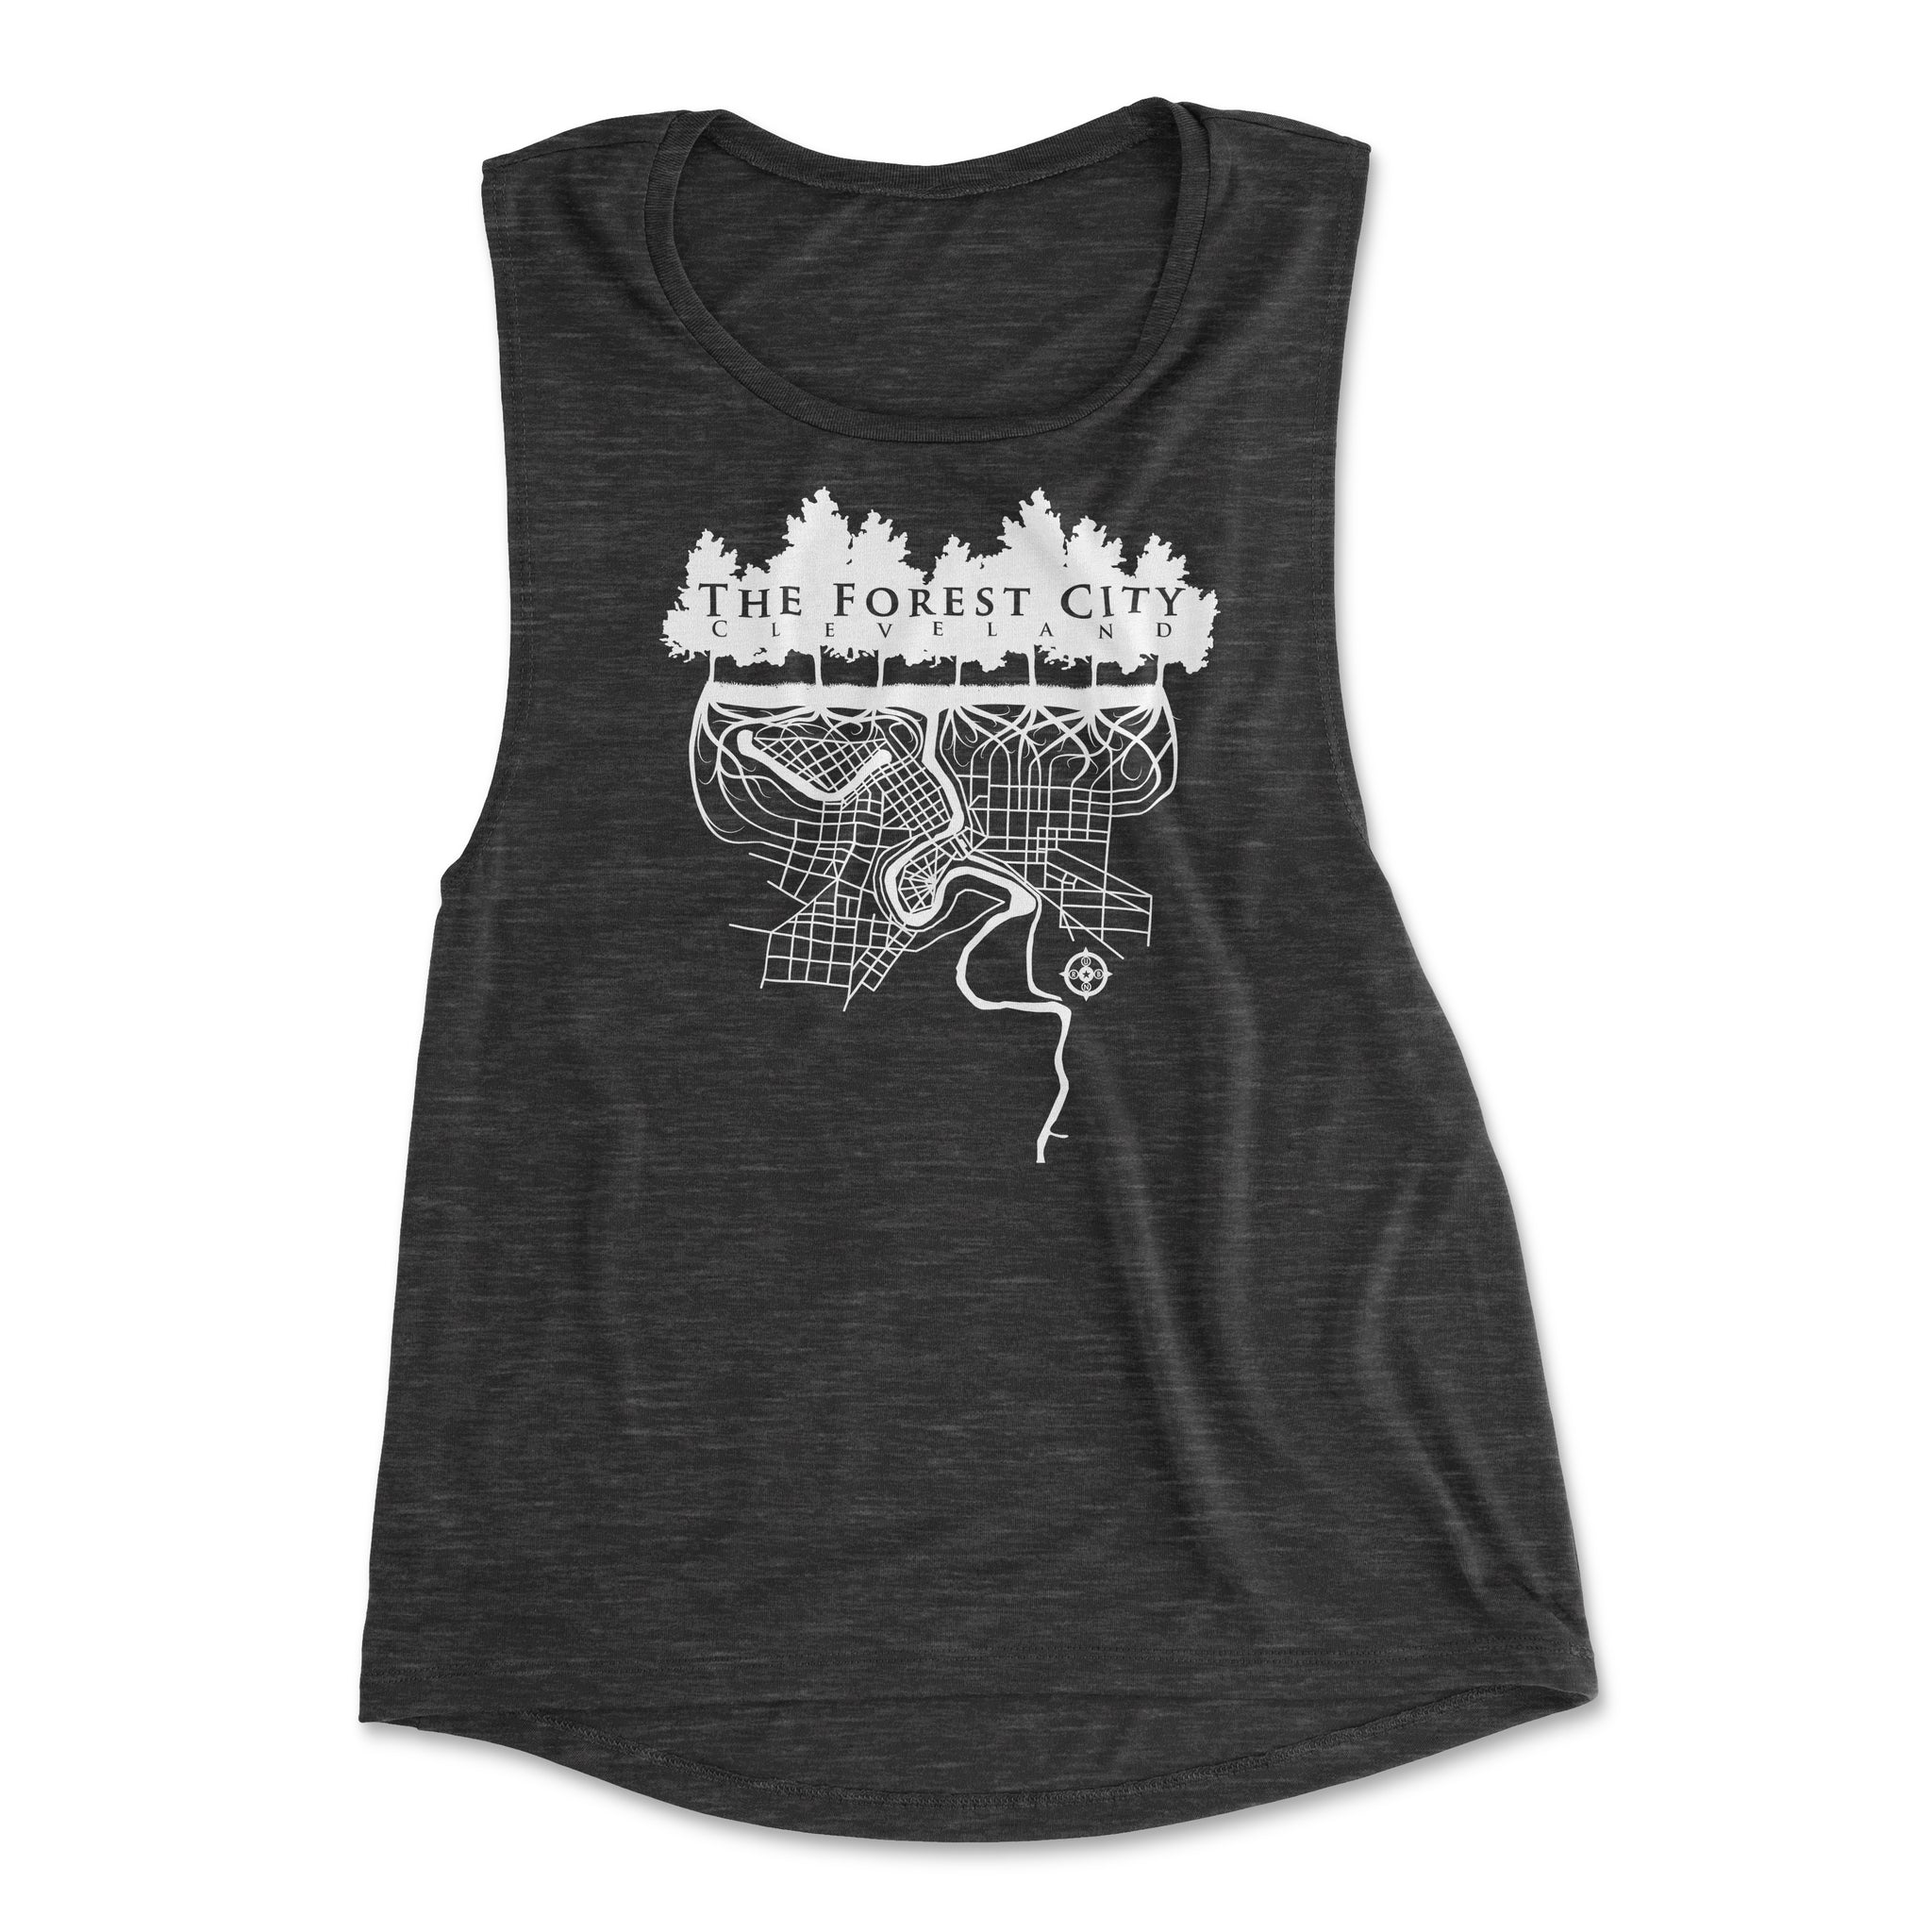 The Forest City Tank Top (Women's)